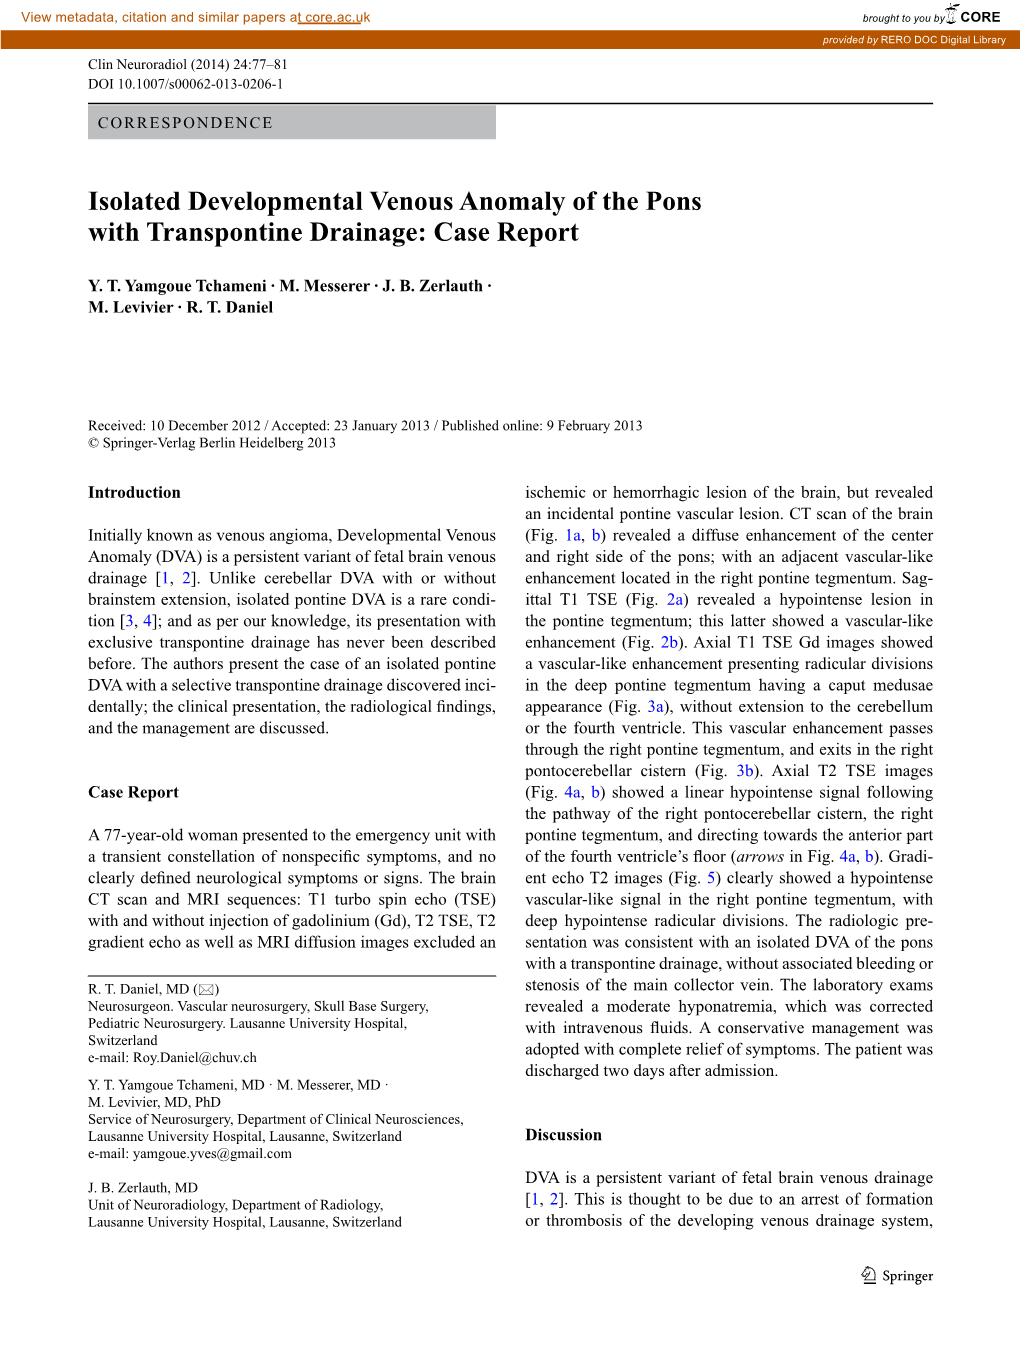 Isolated Developmental Venous Anomaly of the Pons with Transpontine Drainage: Case Report